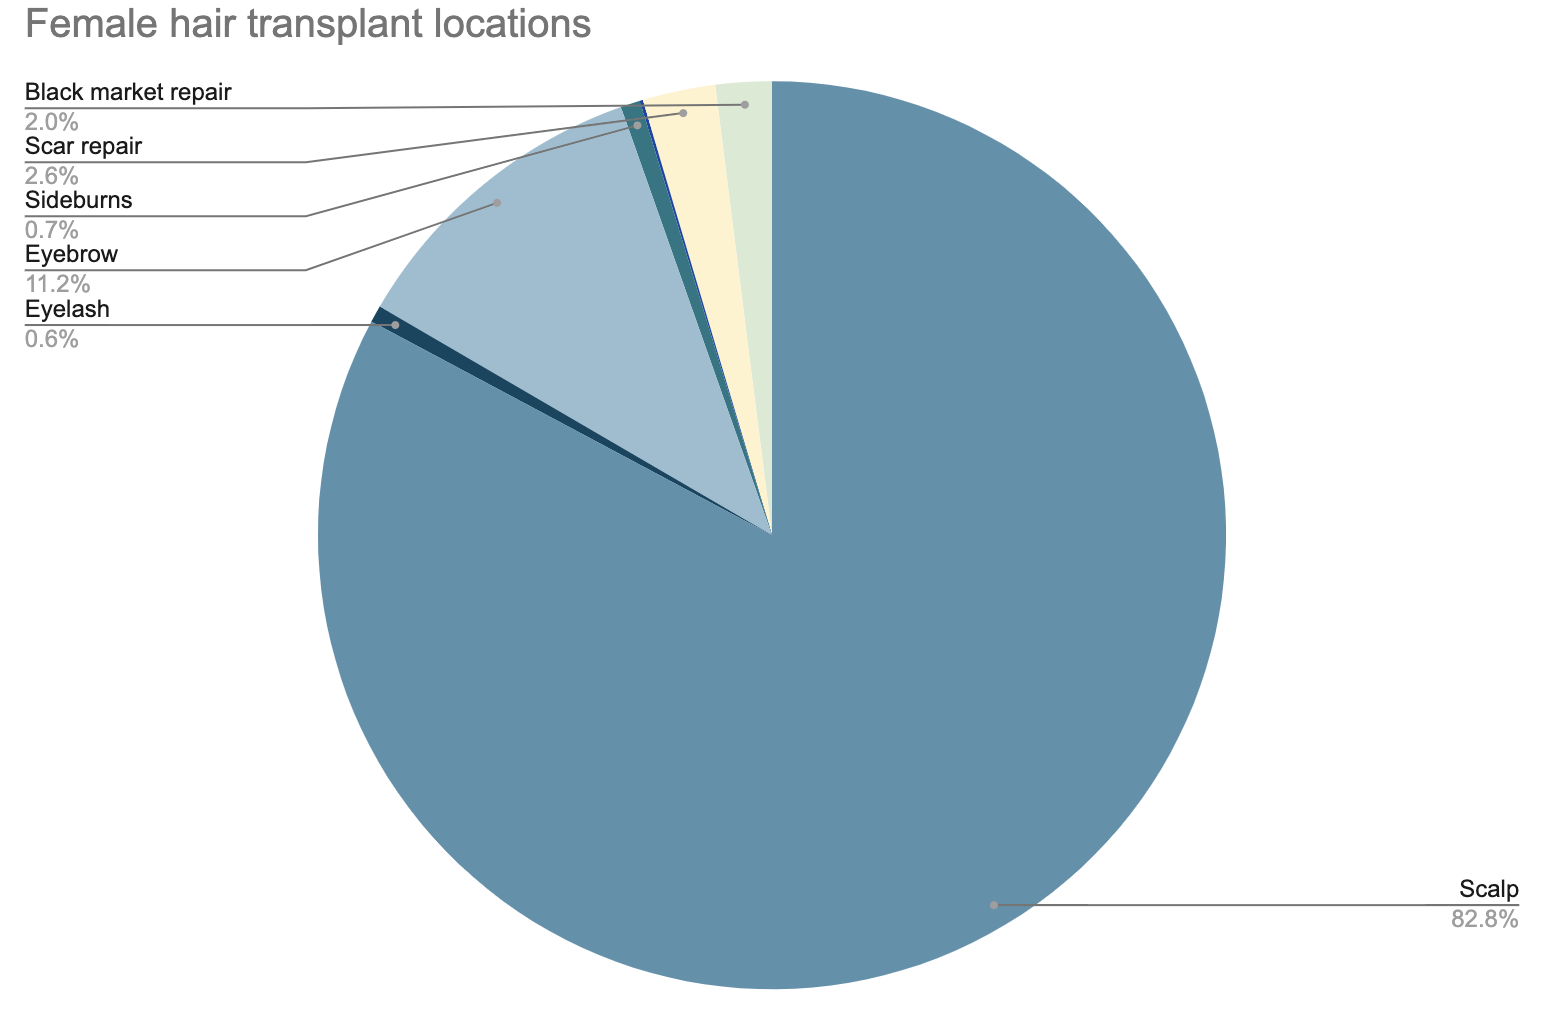 Pie chart showing the percentage of female hair transplant locations